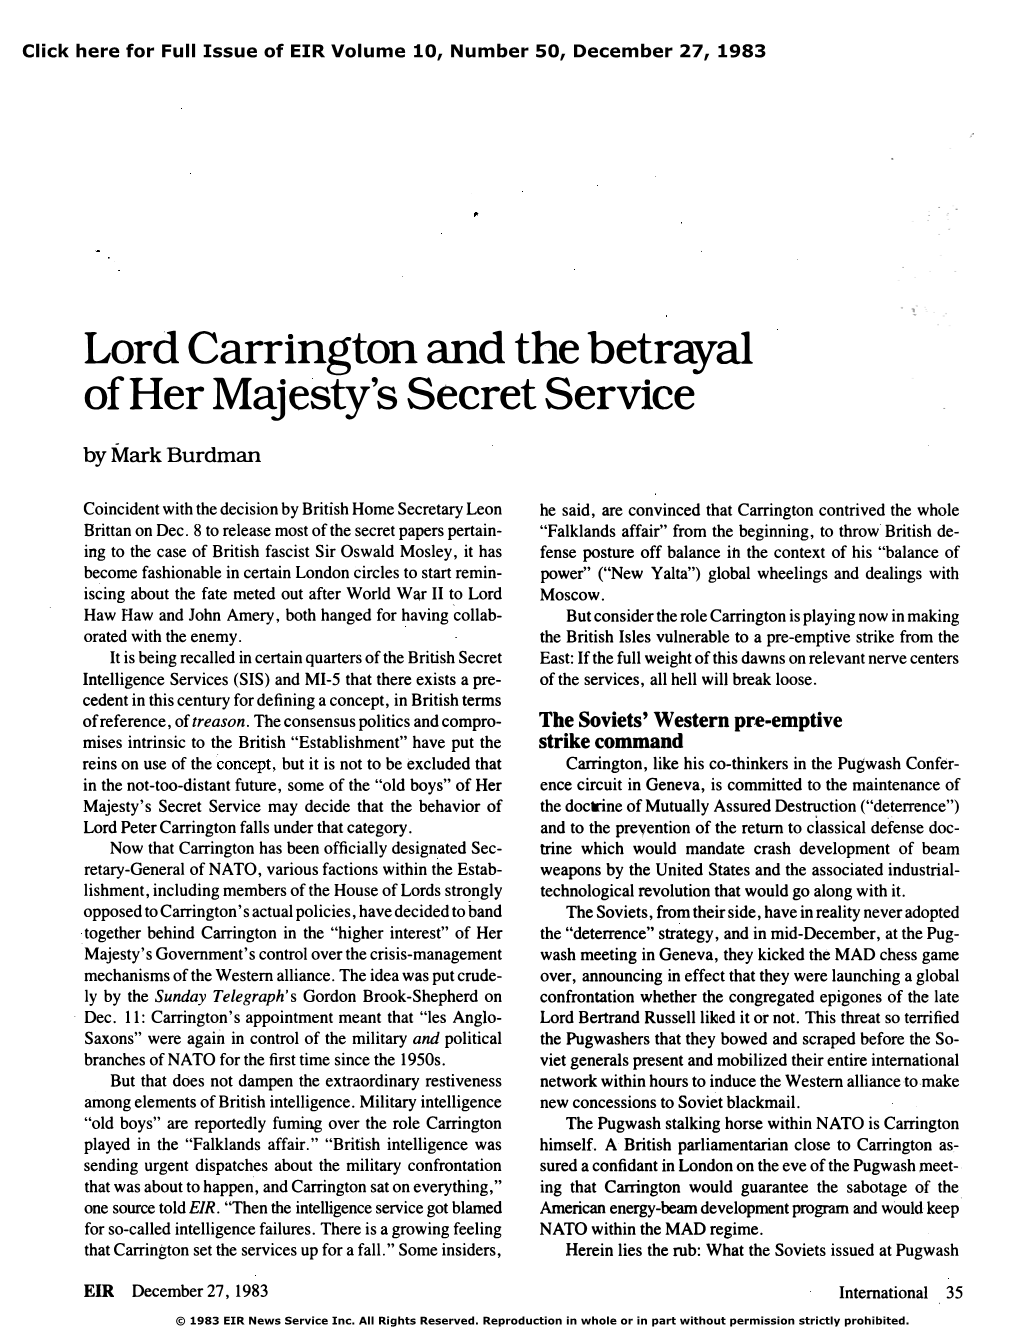 Lord Carrington and the Betrayal of Her Majesty's Secret Service